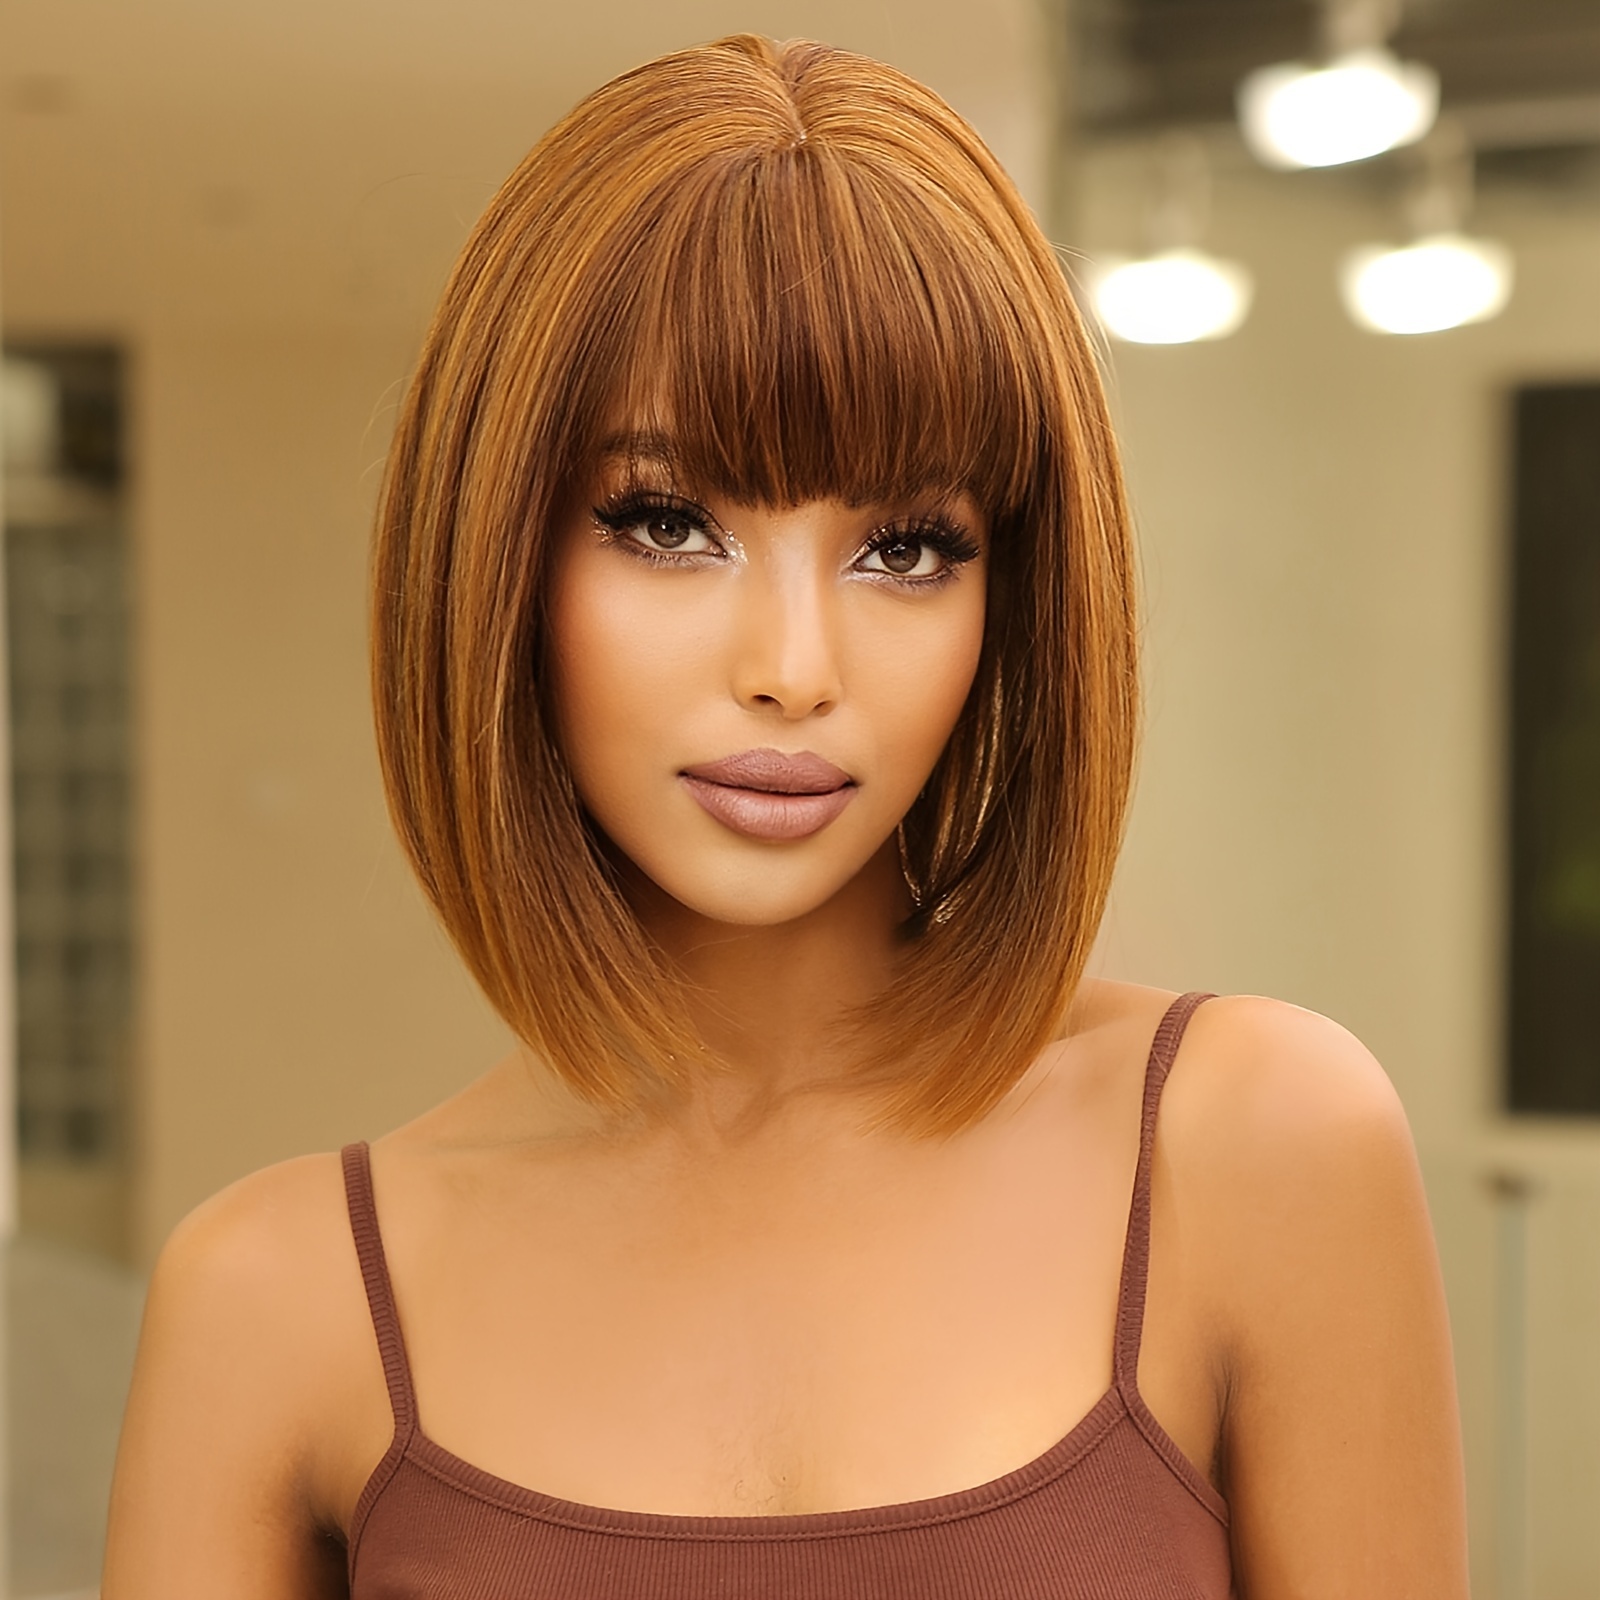 14 Inch Short Brown BOB Wigs for Women with Bangs Shoulder Length Hair Wig